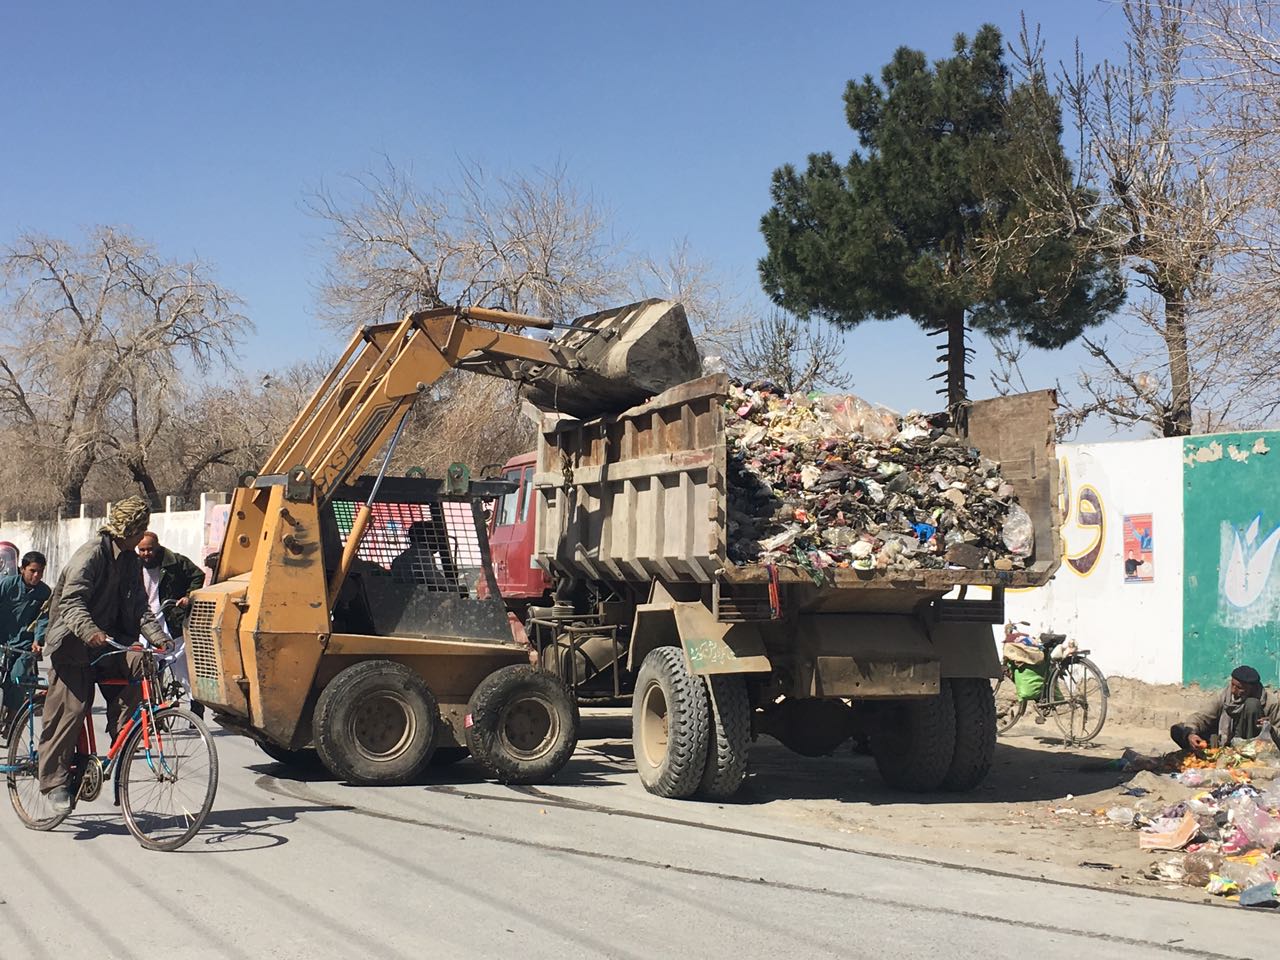 Quetta’s scenic beauty suffers due to lack of garbage disposal services